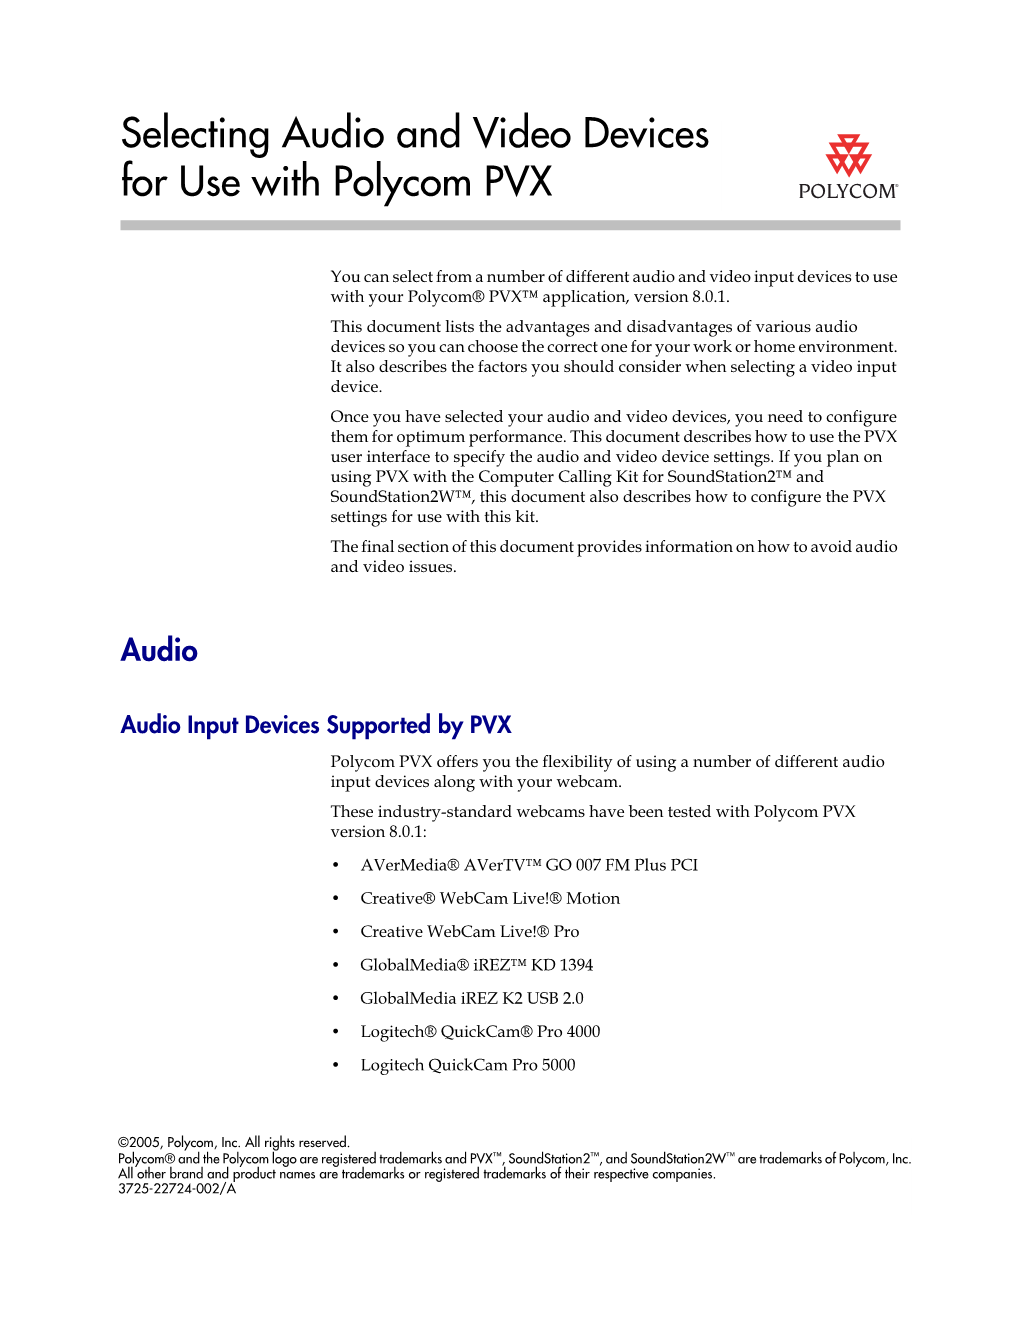 Selecting Audio and Video Devices for Use with Polycom PVX